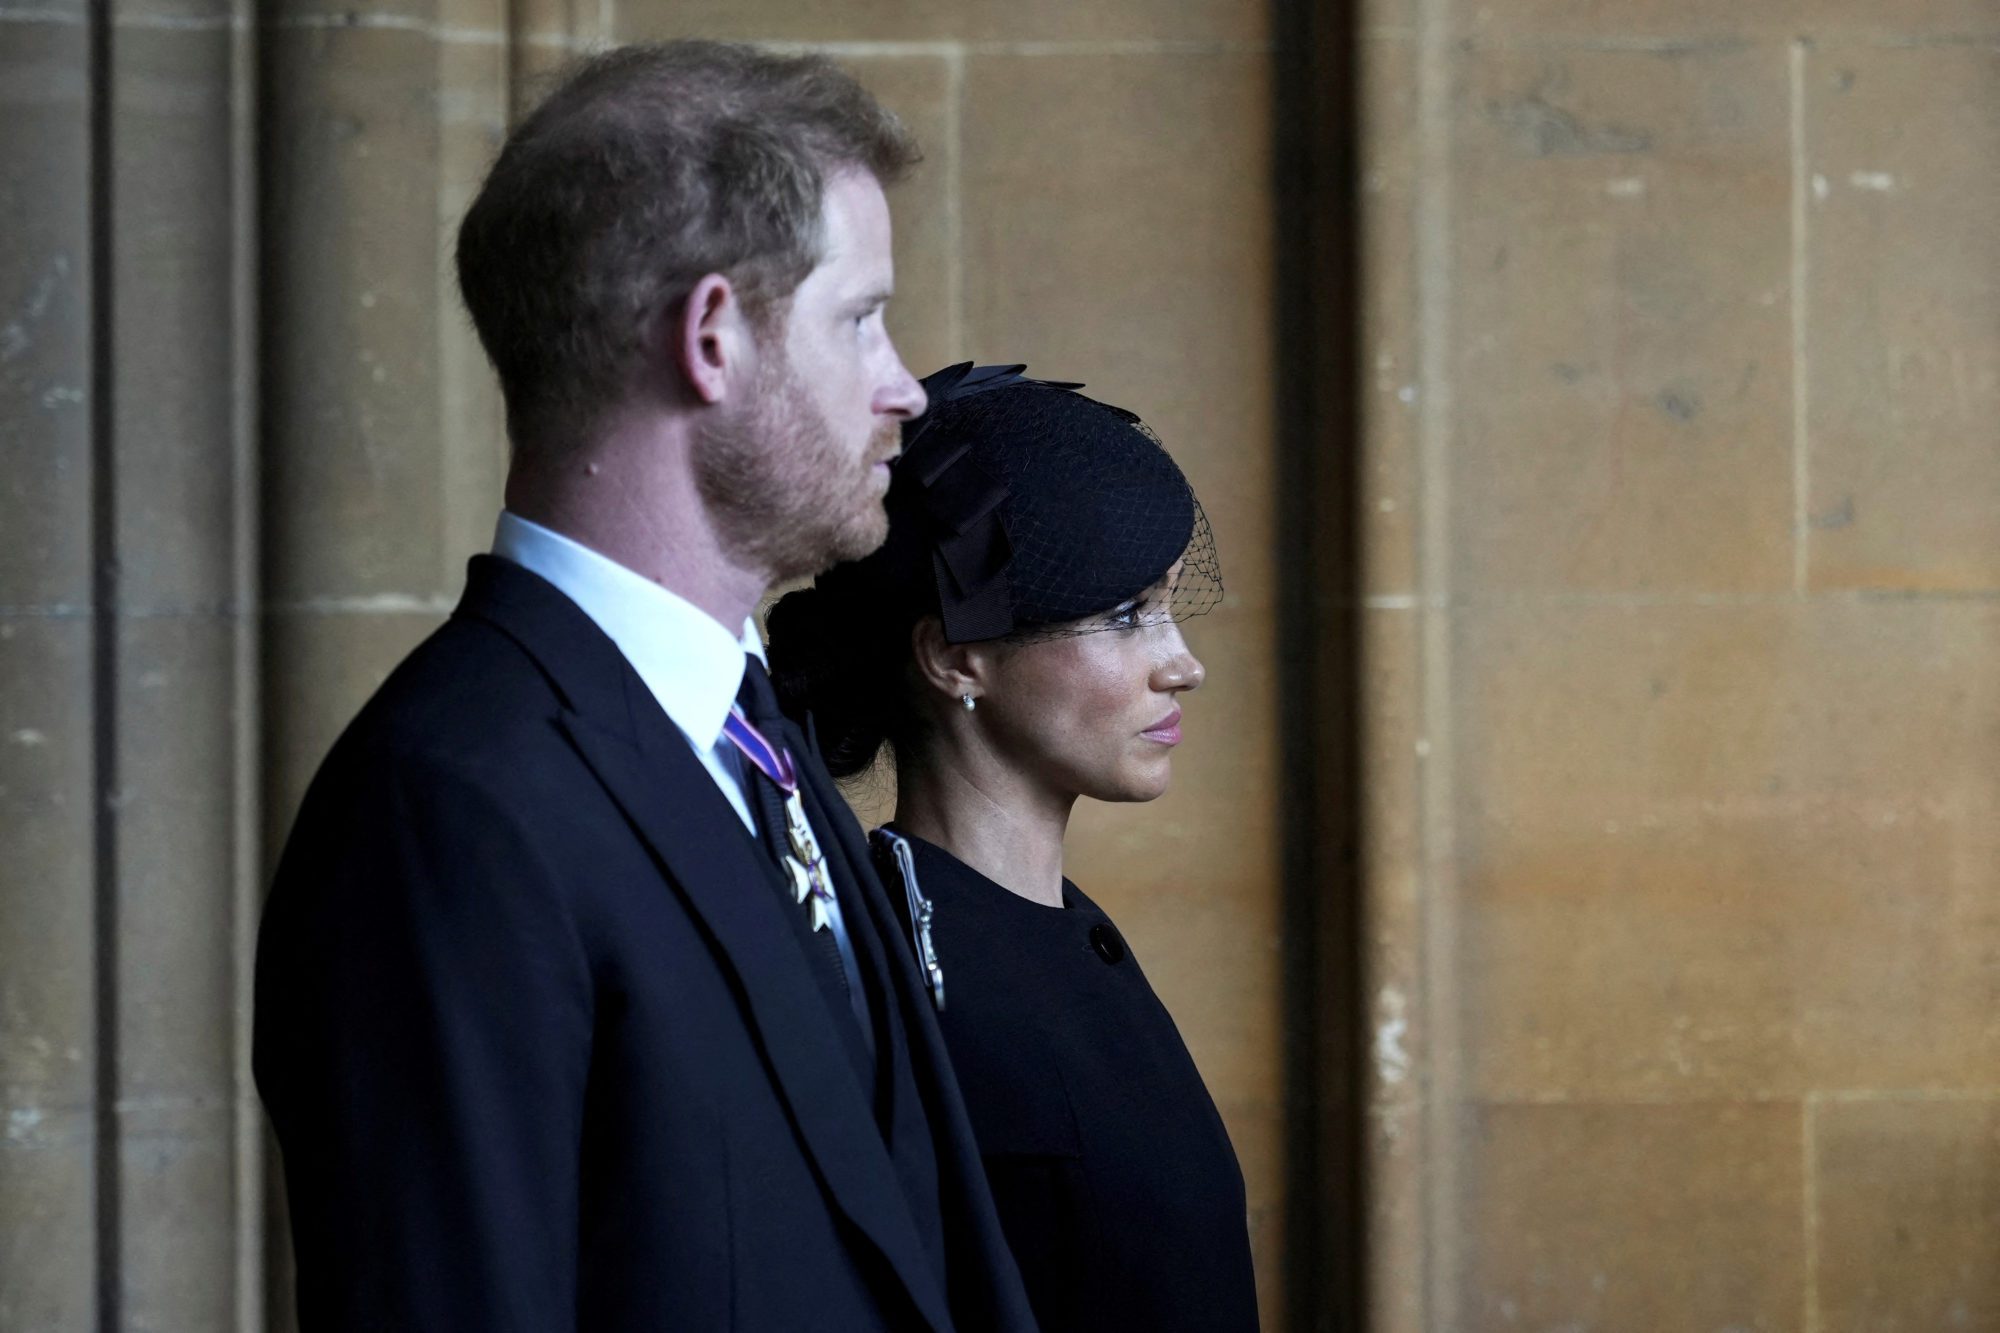 FILE PHOTO: Britain's Prince Harry, left, an Meghan, Duchess of Sussex, leave after they paid their respects to Queen Elizabeth II in Westminster Hall for the Lying-in State, in London, Wednesday, Sept. 14, 2022. Emilio Morenatti/Pool via REUTERS